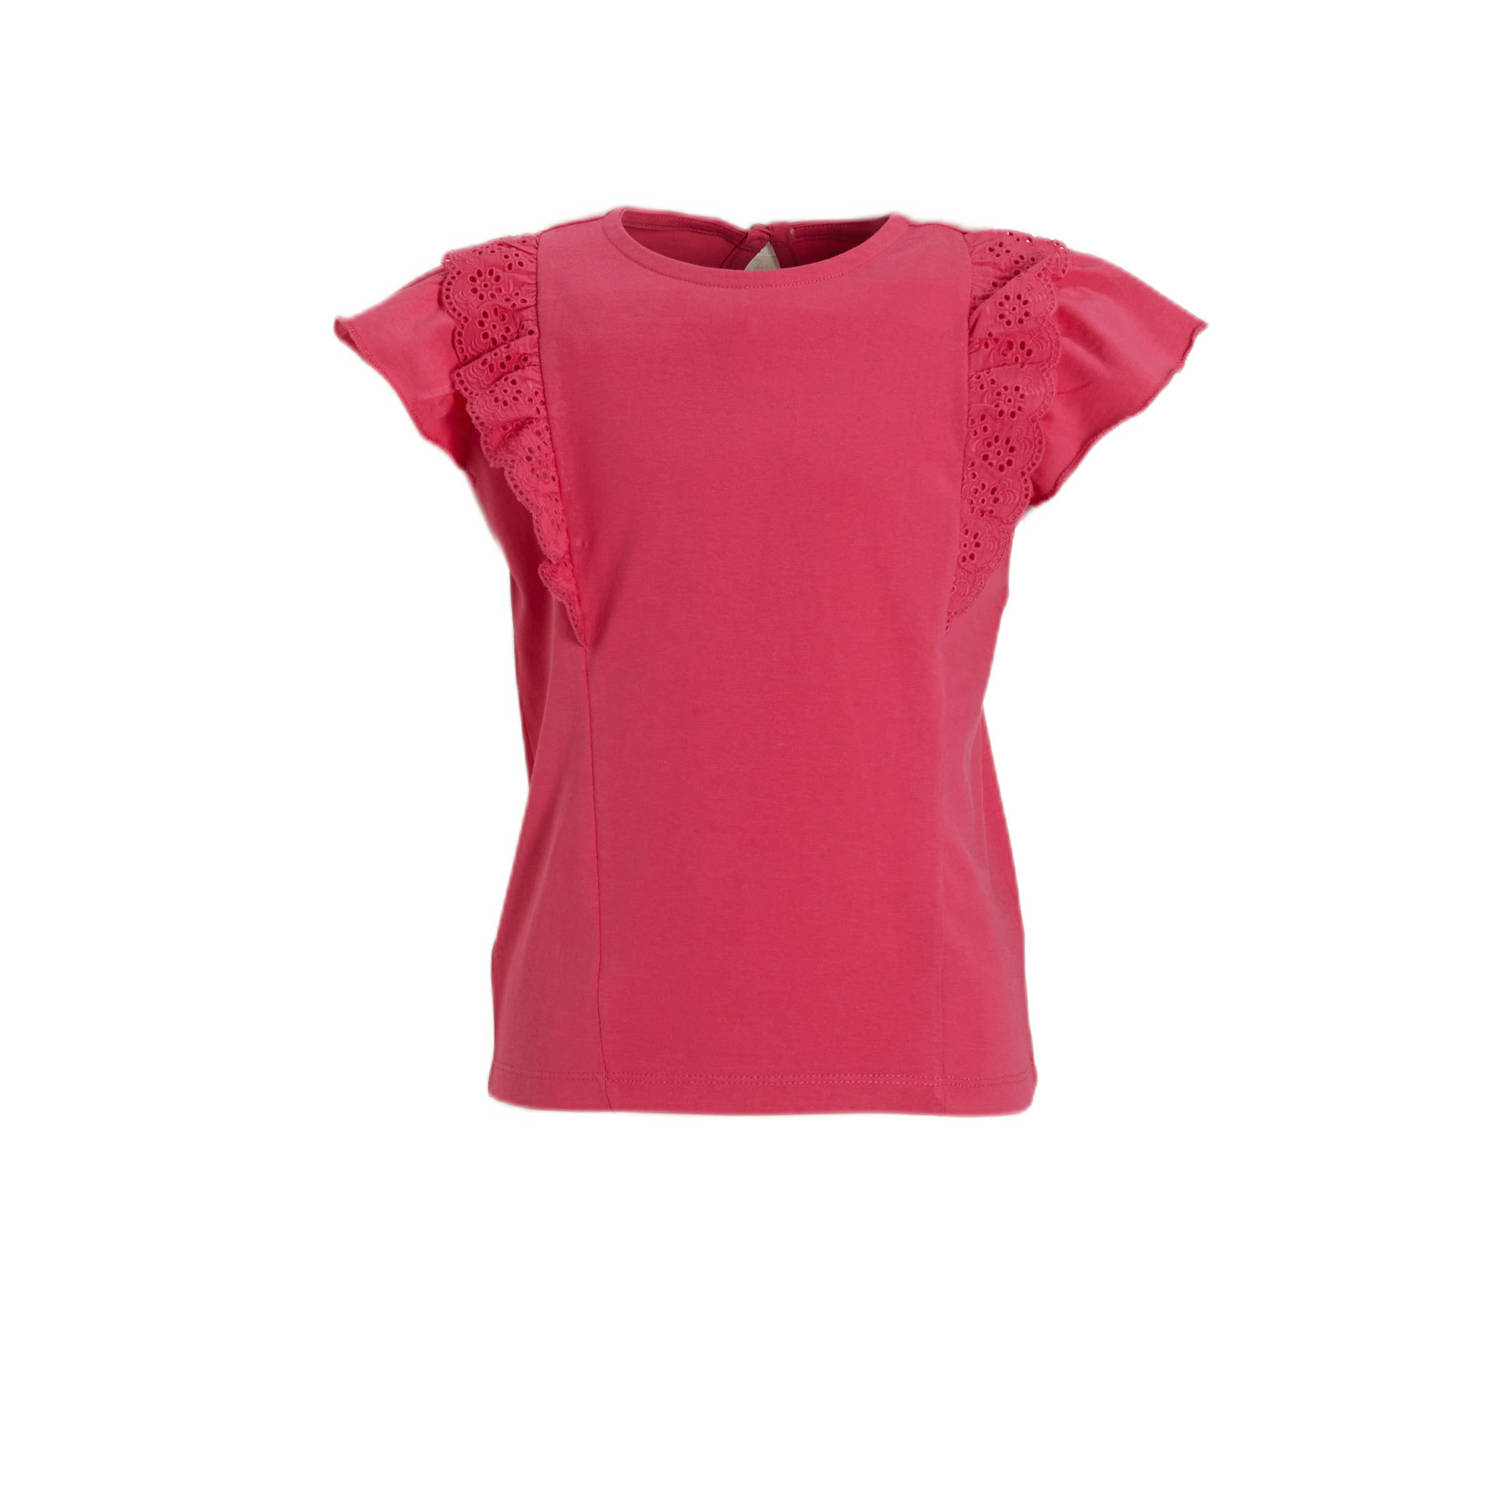 anytime T-shirt met broderie roze